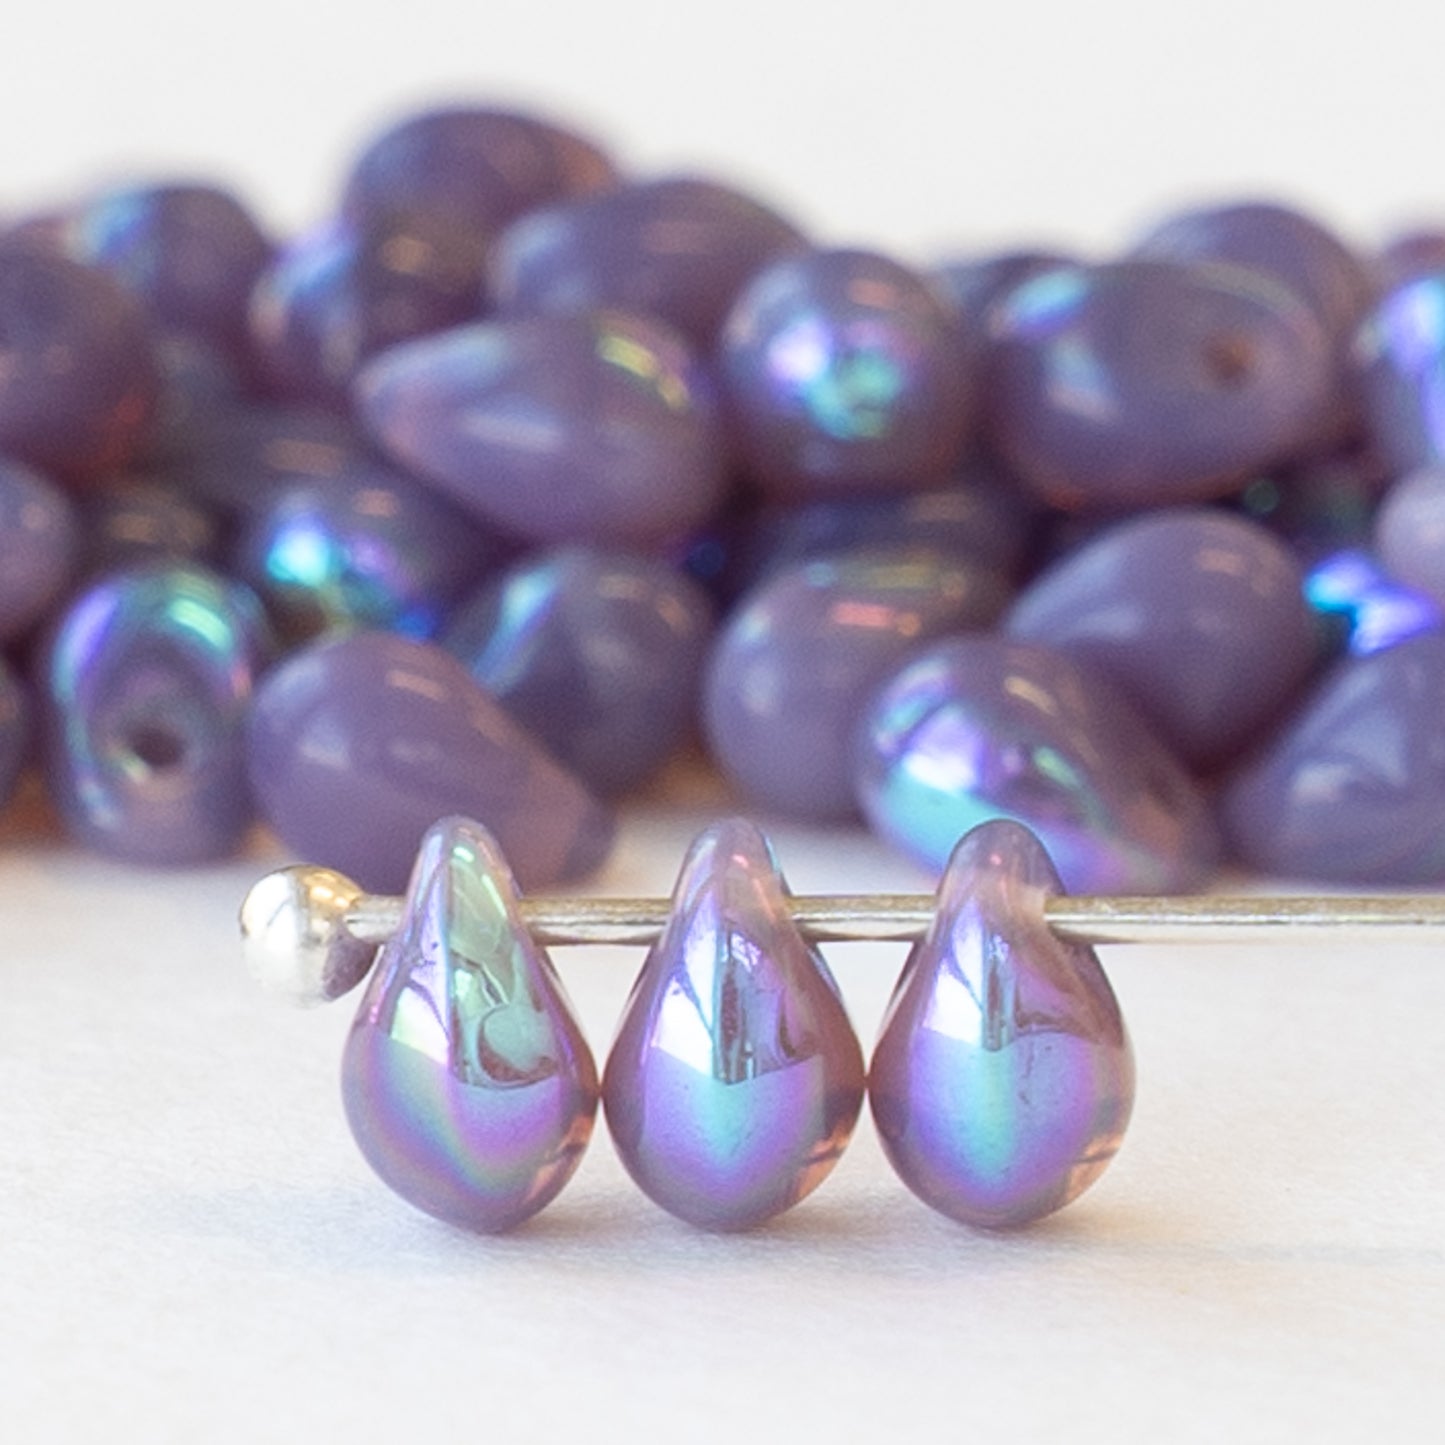 Load image into Gallery viewer, 4x6mm Glass Teardrops - Opaque Lavender AB - 100 Beads
